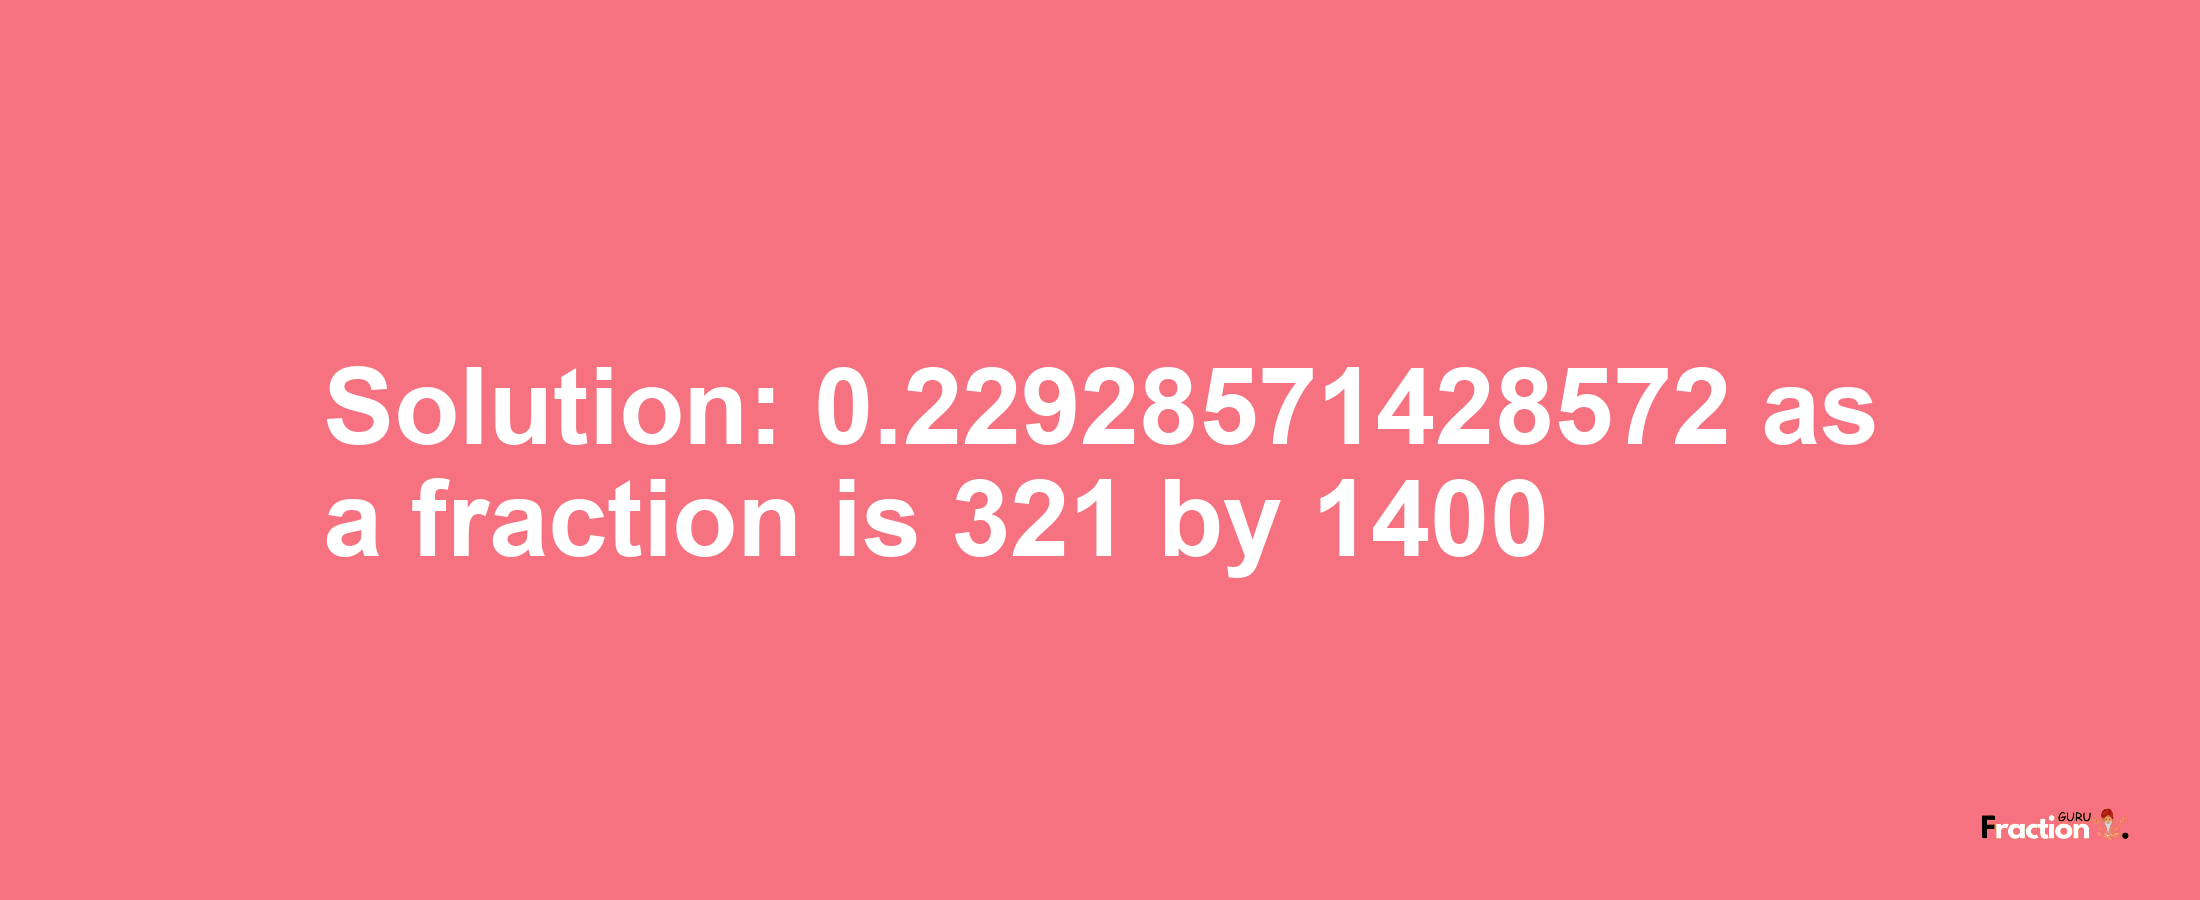 Solution:0.22928571428572 as a fraction is 321/1400